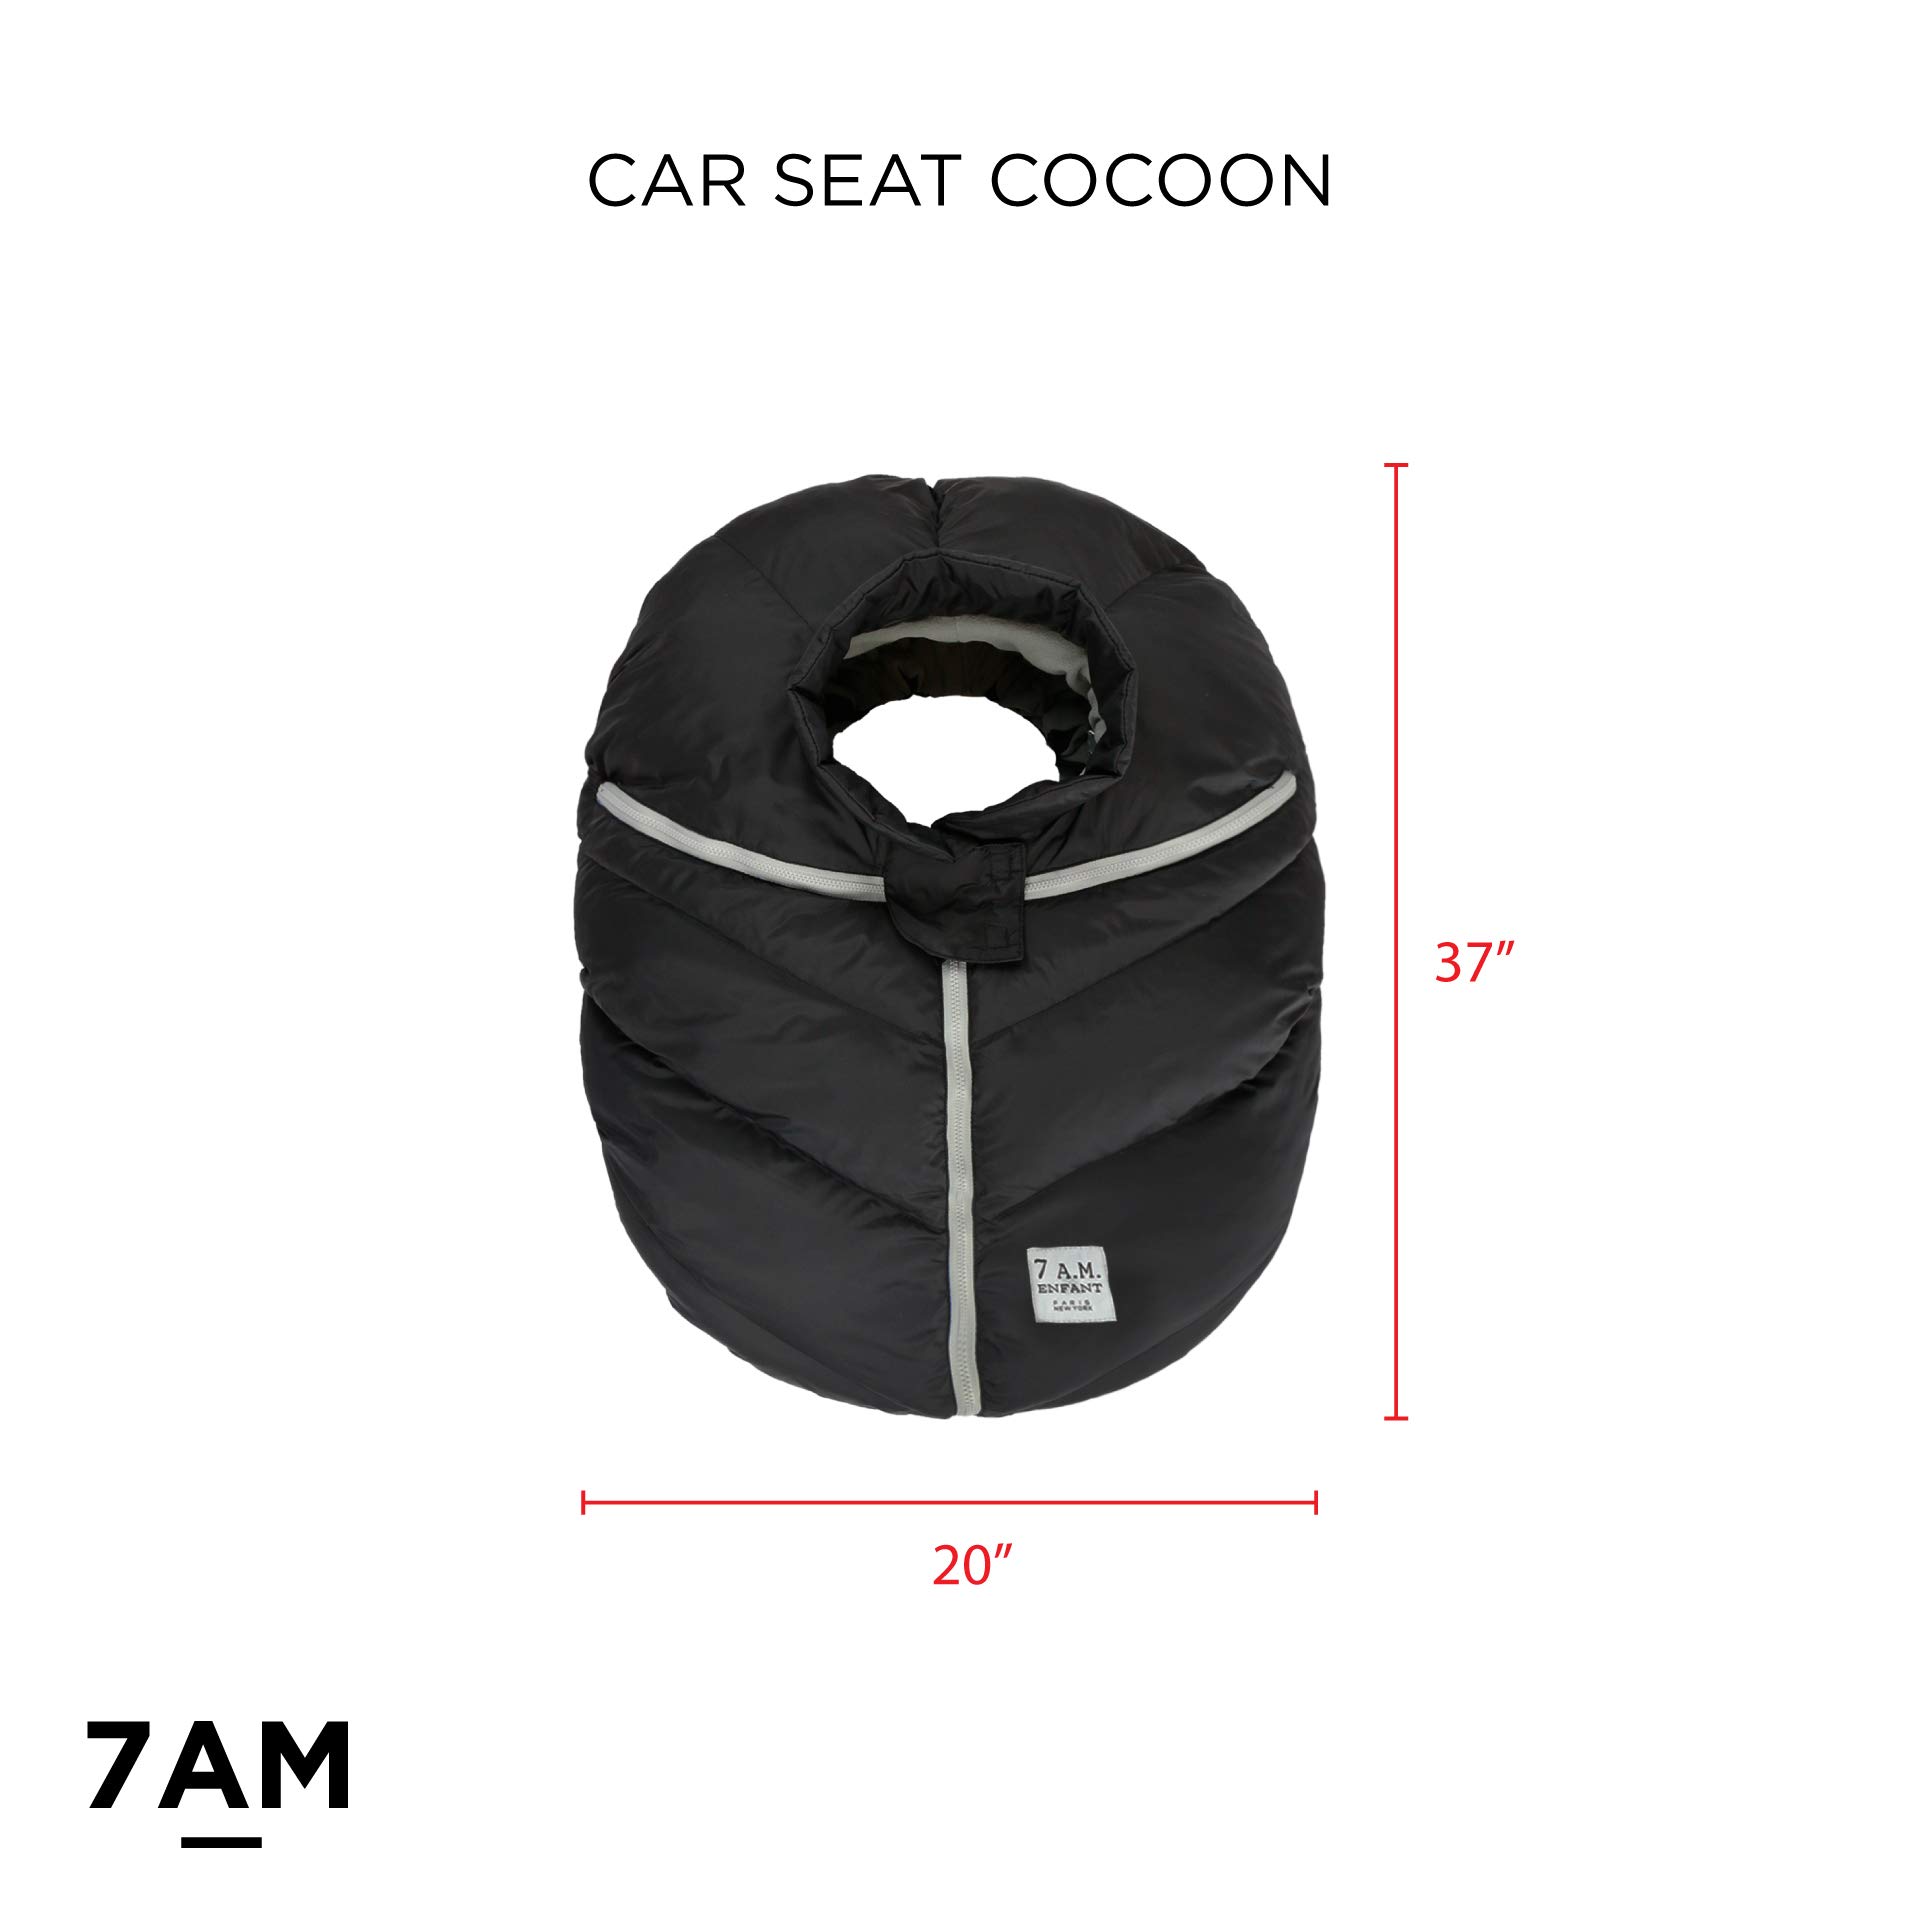 7AM Enfant Car Seat Covers - Cocoon Baby Cover for Boys & Girls, Rain & Snow Repellent, Breathable Windproof, Center Zipper, Universal Fit for Infant Car Seat (0-12M)